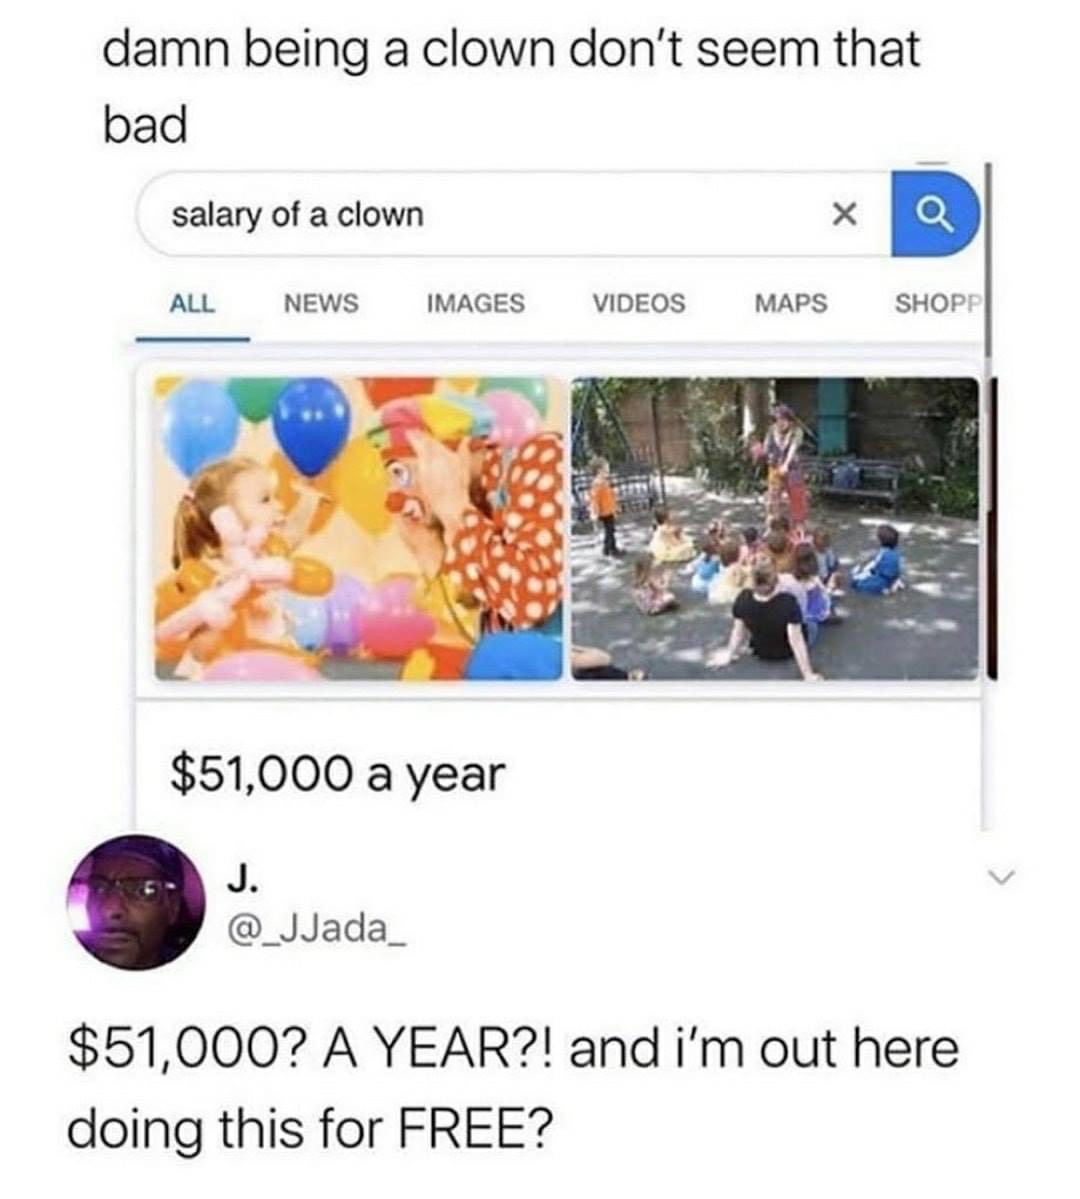 clown memes - damn being a clown don't seem that bad salary of a clown Q All News Images Videos Maps Shopp $51,000 a year $51,000? A Year?! and i'm out here doing this for Free?